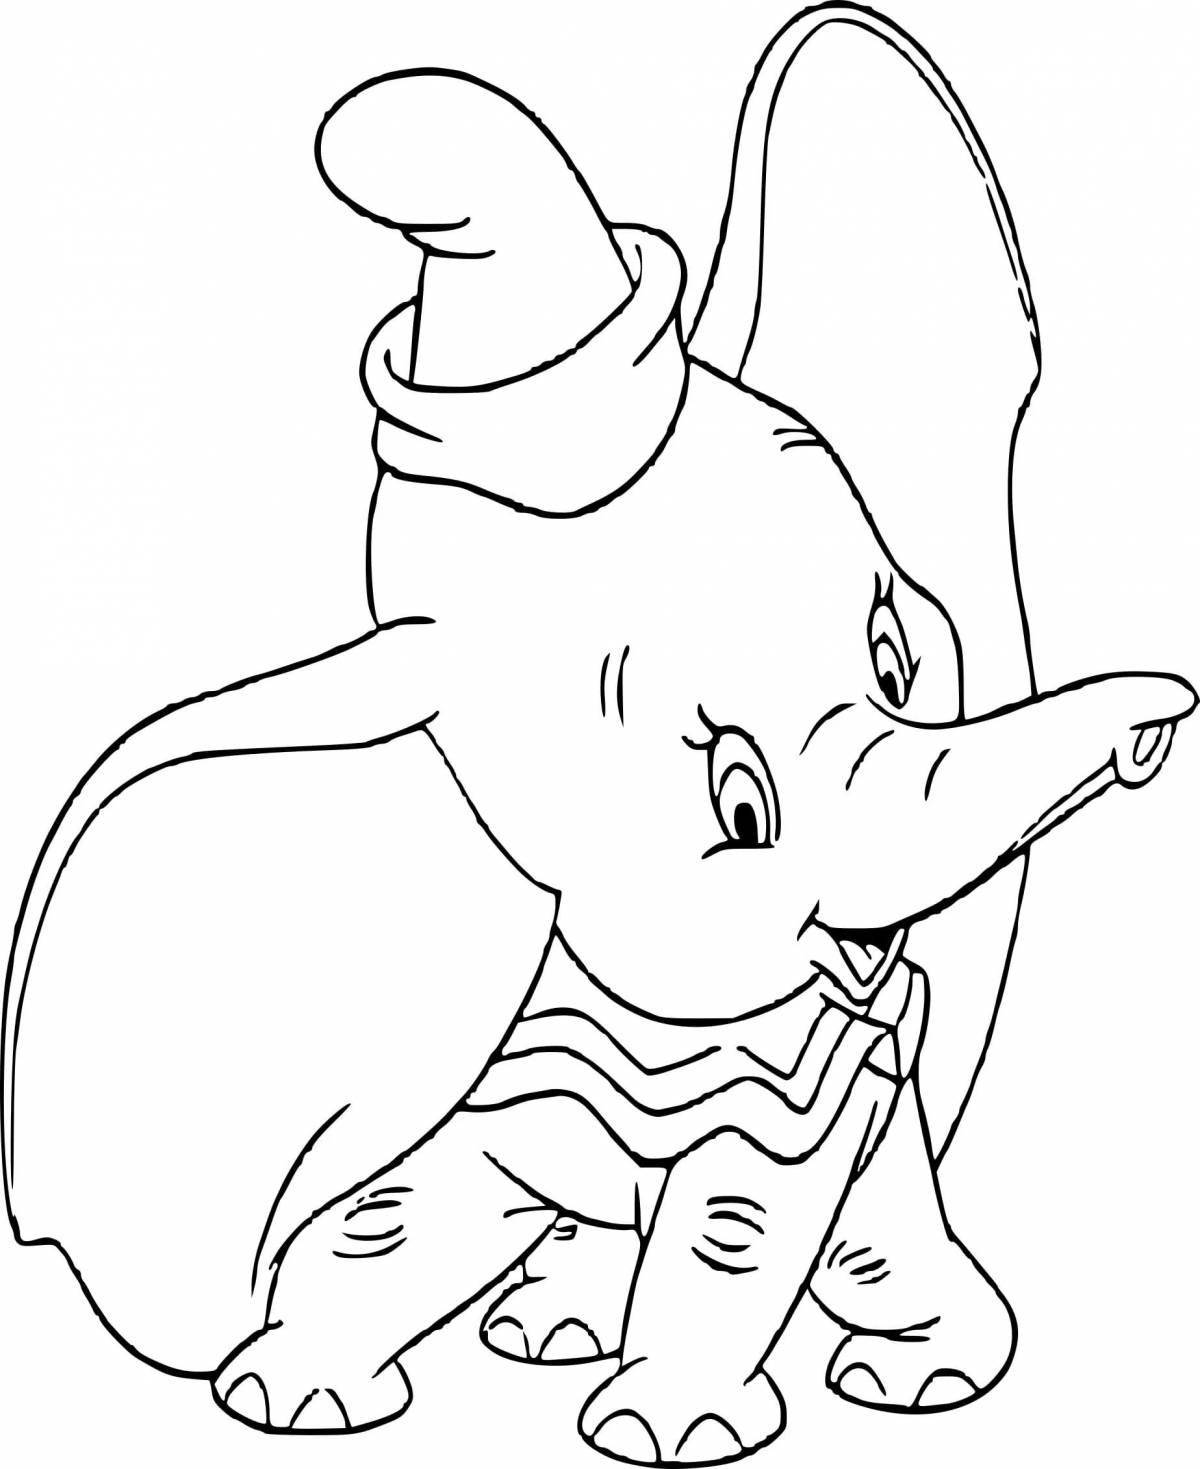 Adorable Dumbo Elephant Coloring Page